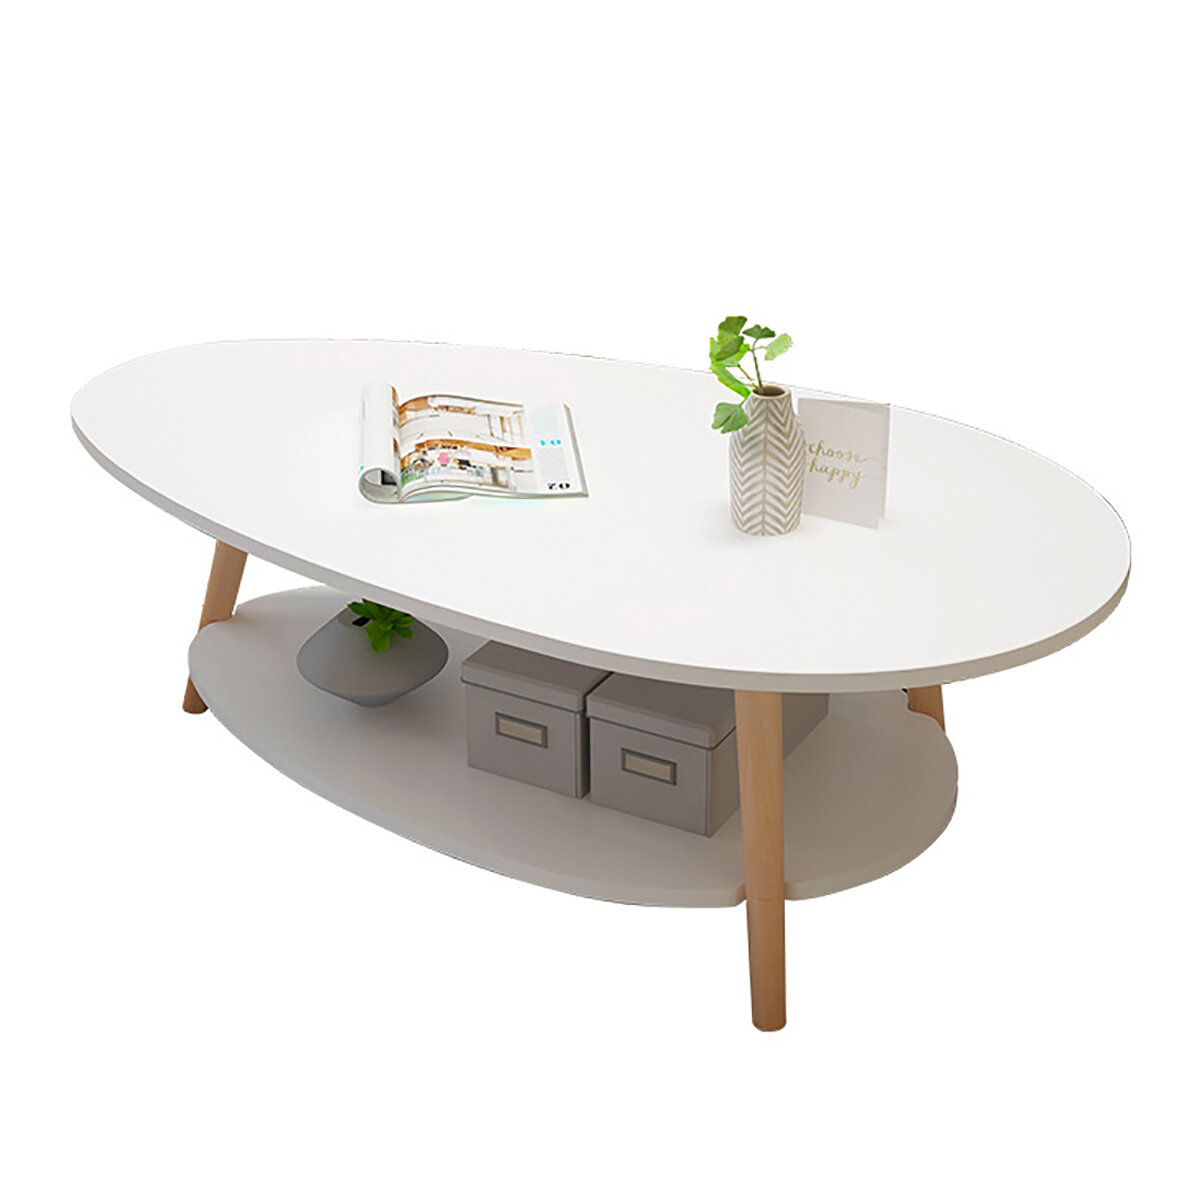 Double Layers Coffee Table Modern, Round Table Storage